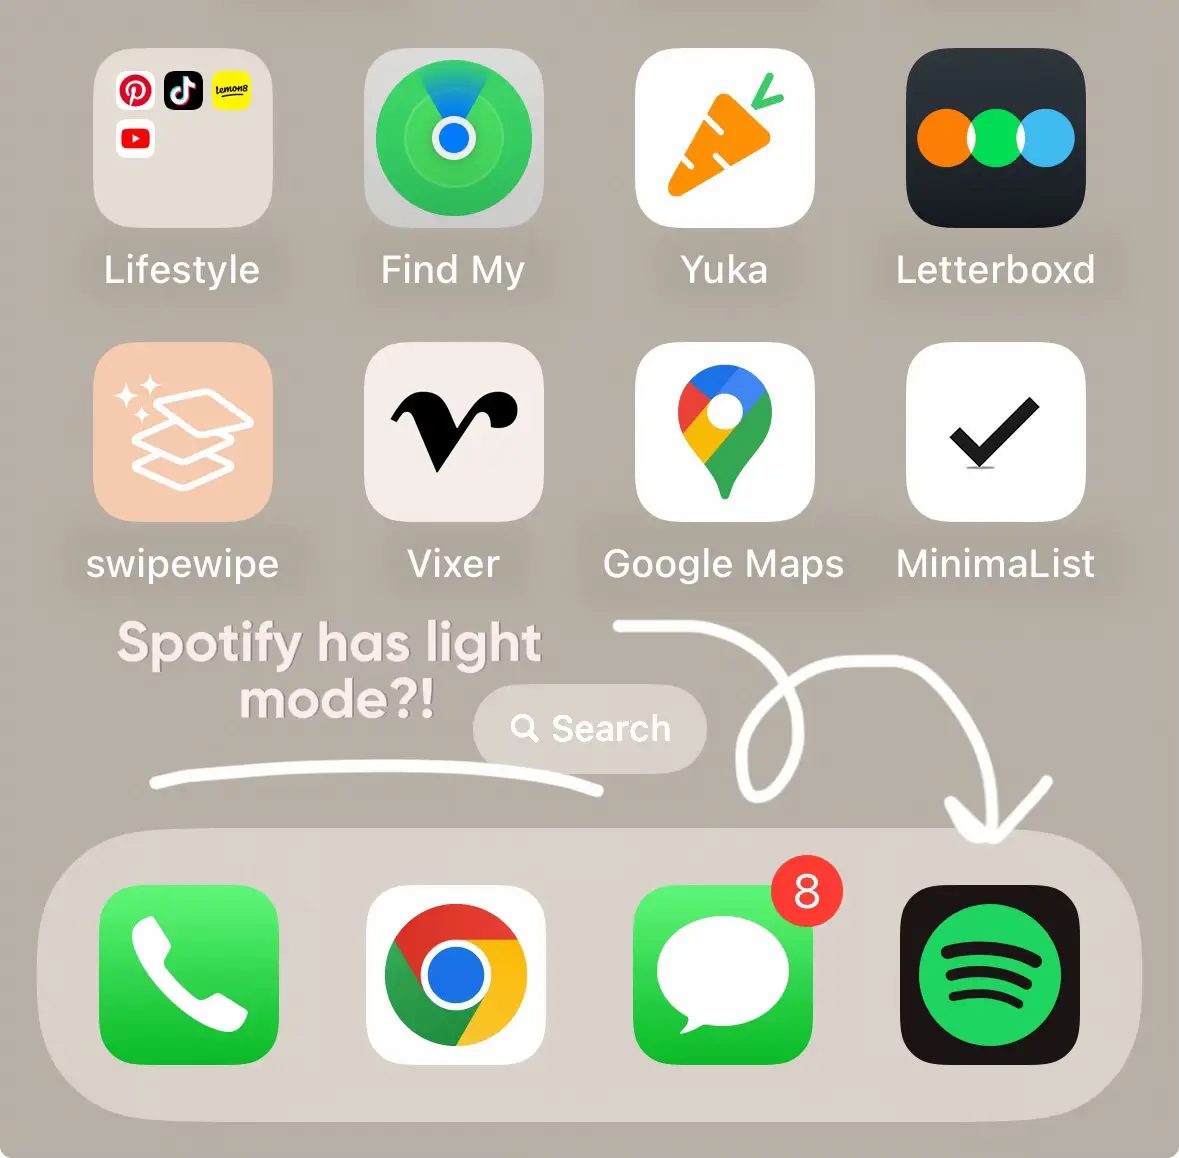 Not that life changing but here's a cool little trick I found; enabling  smart invert for Spotify in your accessibility per app settings removes the  background gradient for your album & playlist